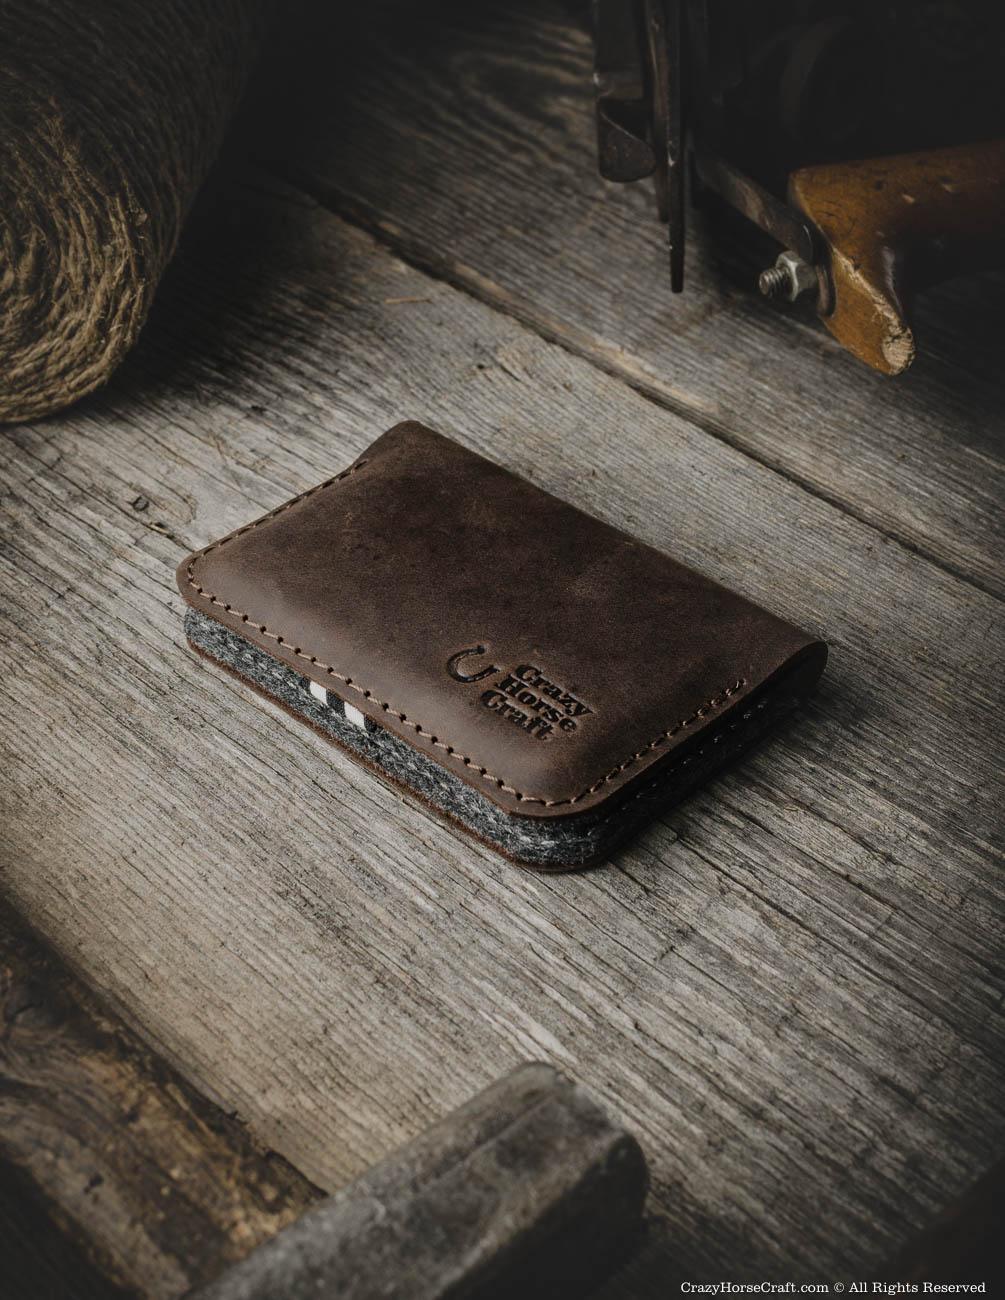 Brown Leather Business and credit card holder